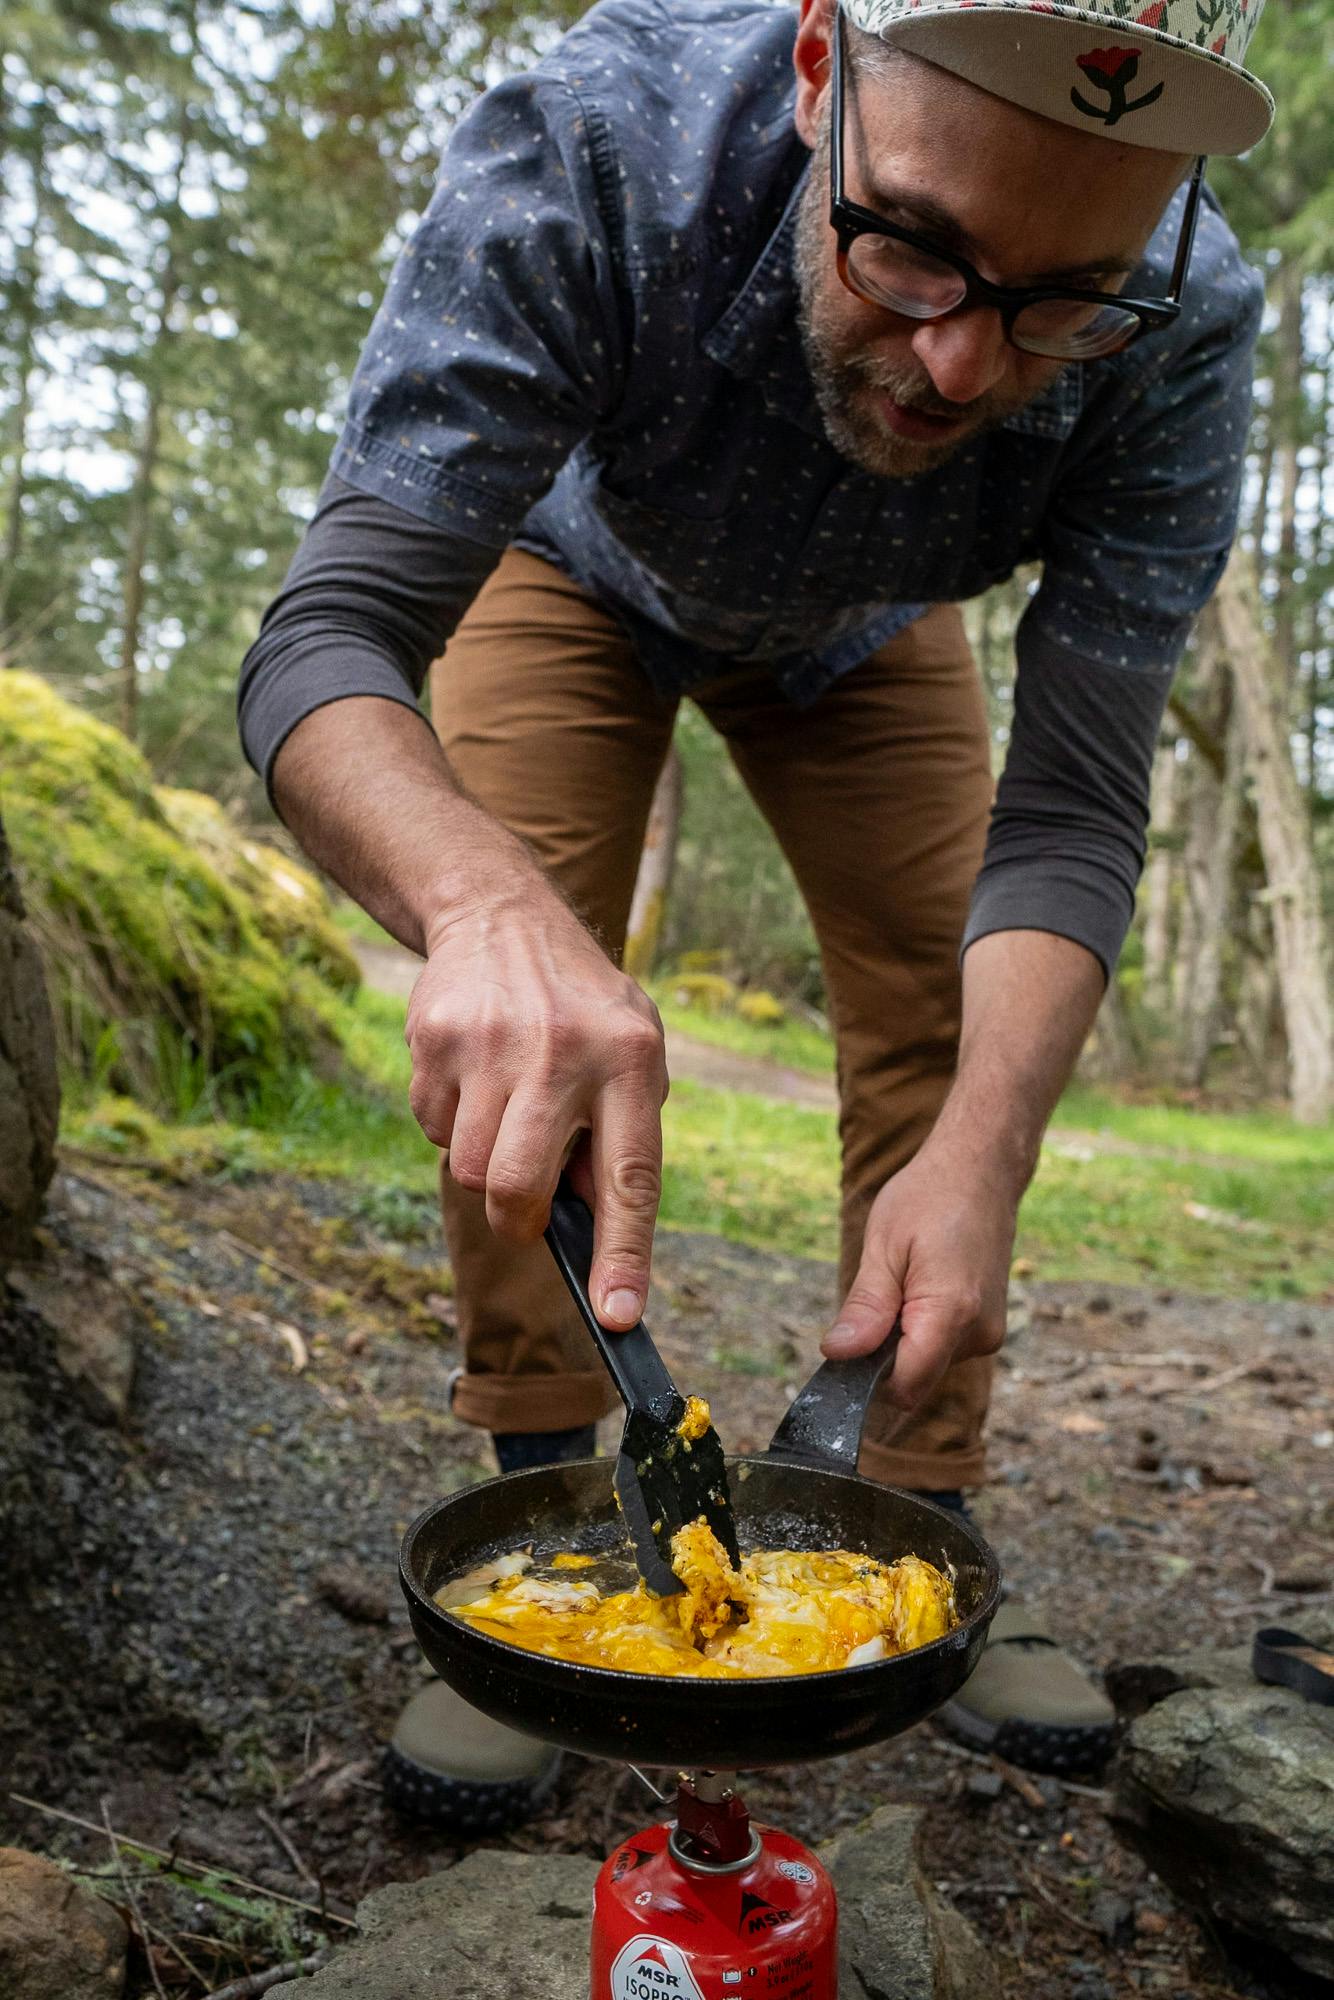 Barry cooks eggs in the forest.